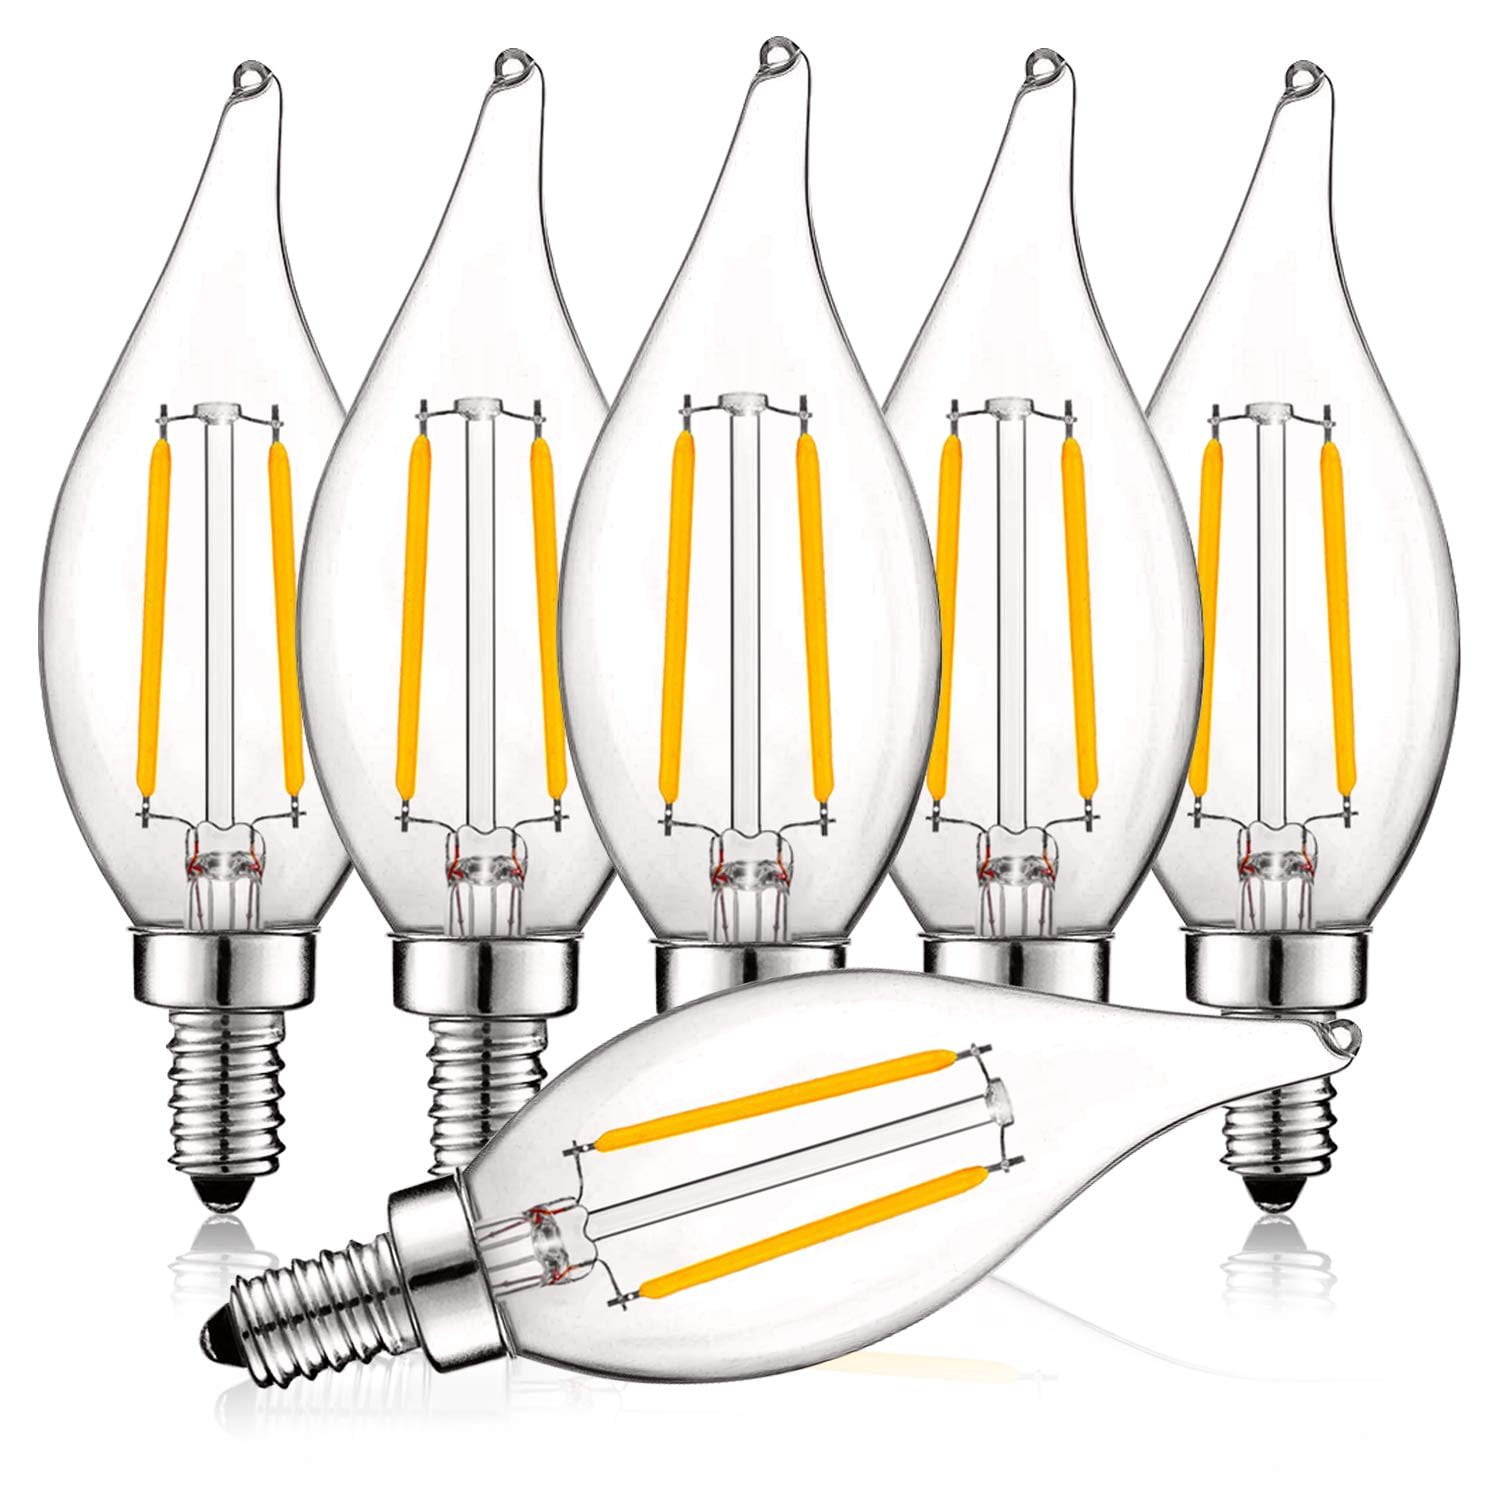 UL Listed, 3000K Soft White 50W Equivalent Xtricity 120V 3 Pack 500 Lumens LED 5.5W G16.5 Clear Globe Filament Light Bulb Dimmable E12 Candelabra Base